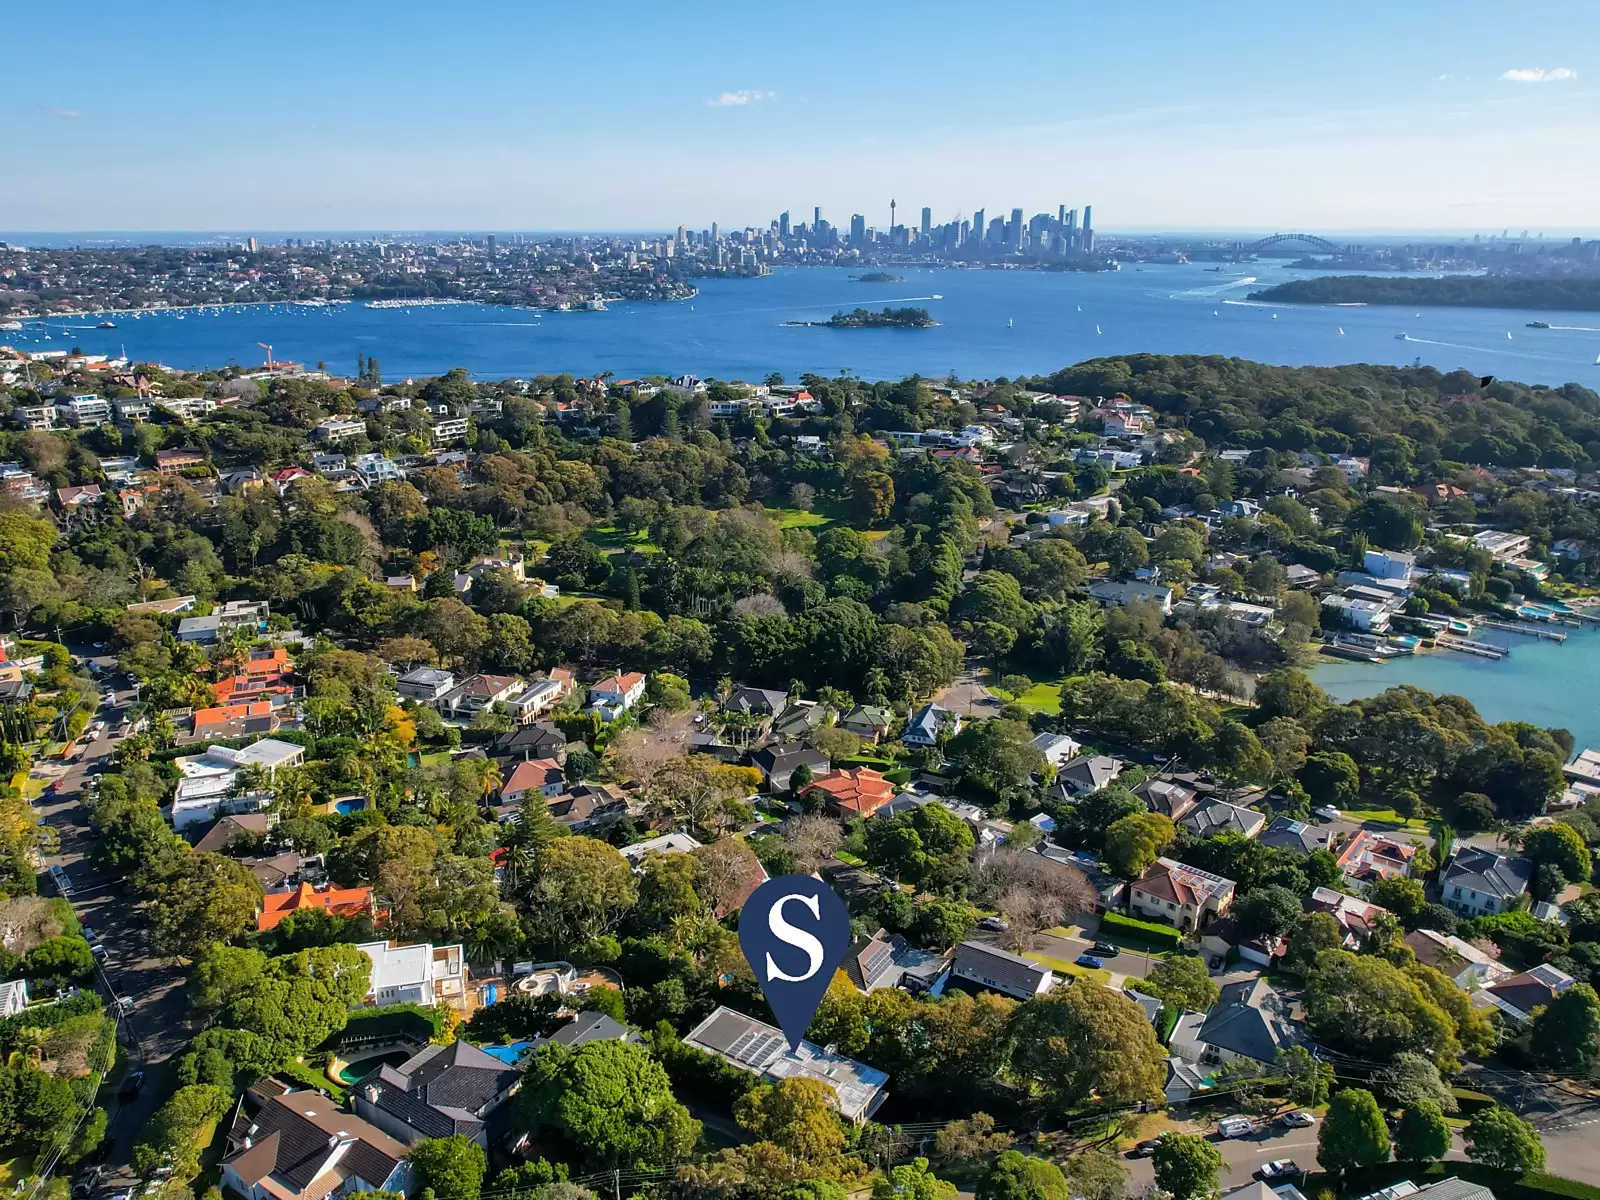 Photo #17: 20 Fitzwilliam Road, Vaucluse - Sold by Sydney Sotheby's International Realty